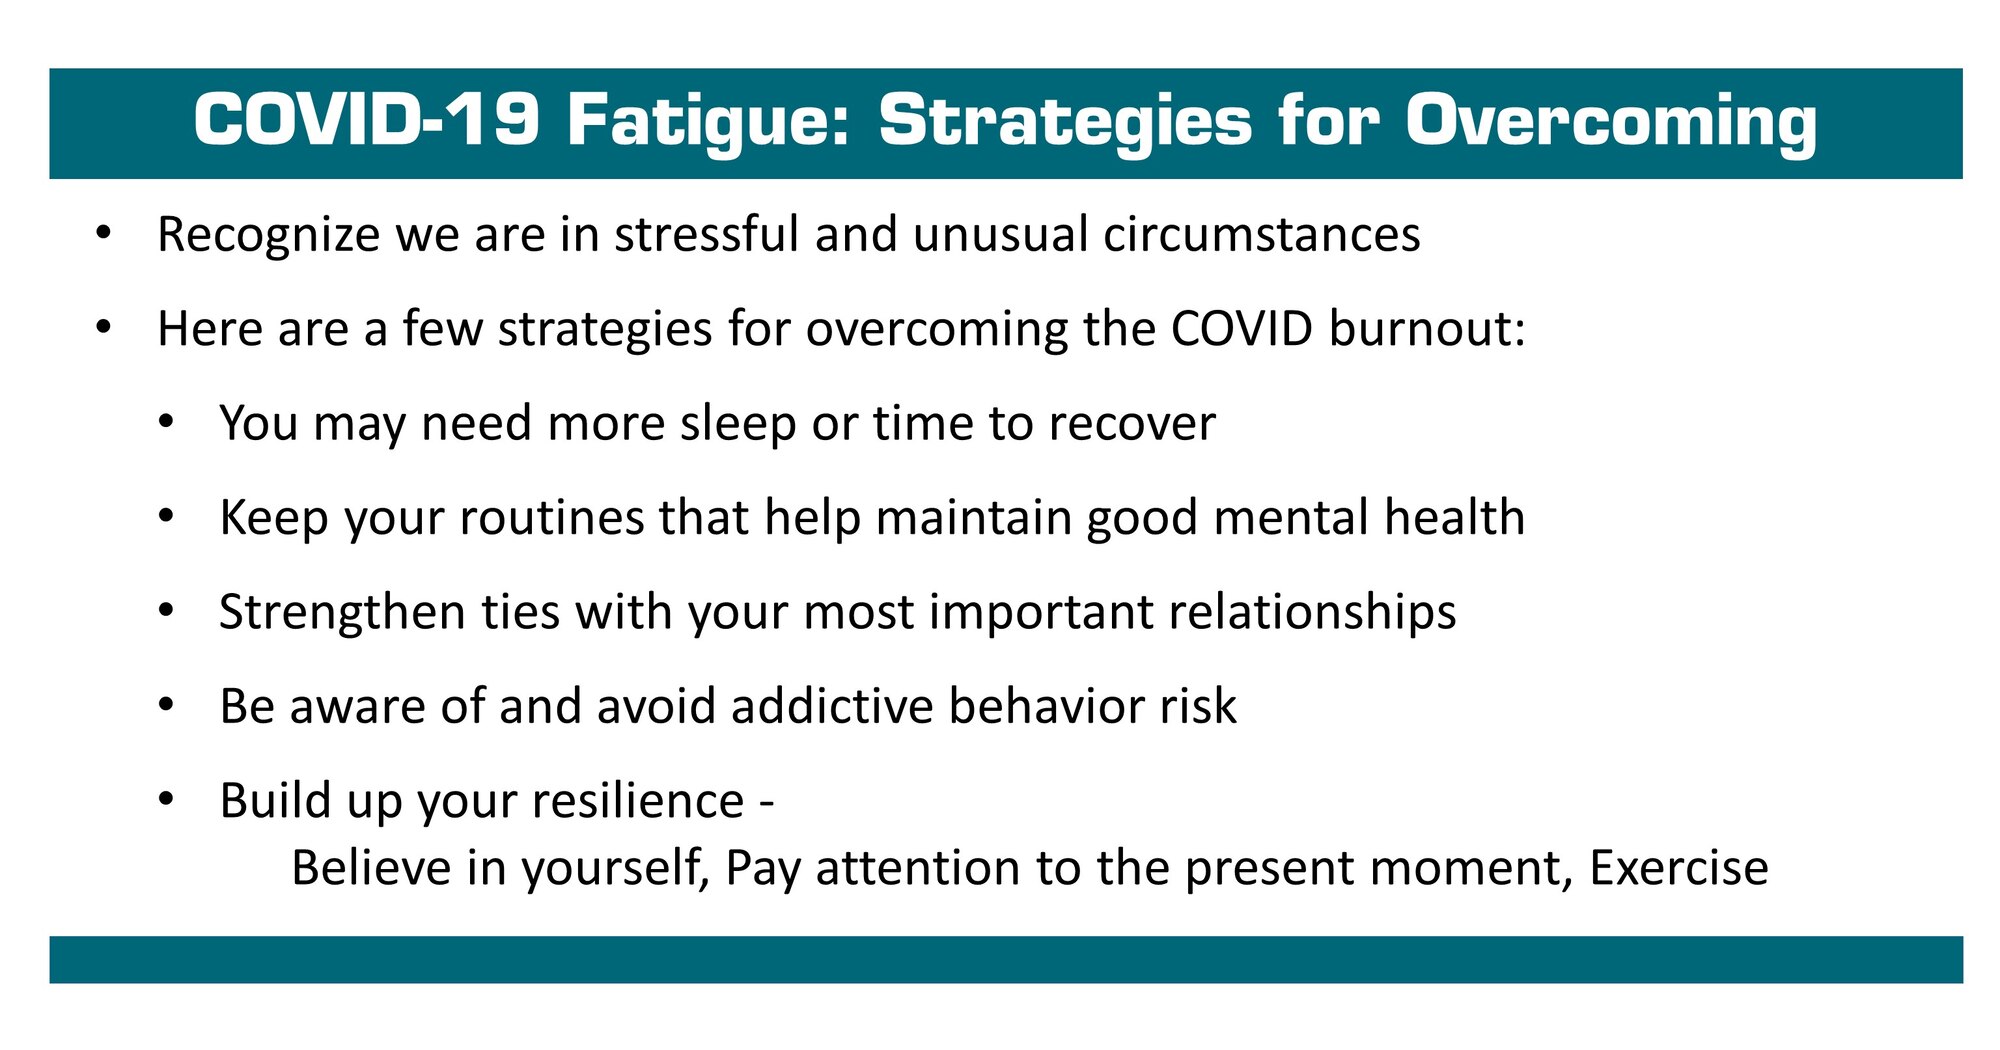 Strategies for overcoming COVID fatigue and recognizing the burn out.